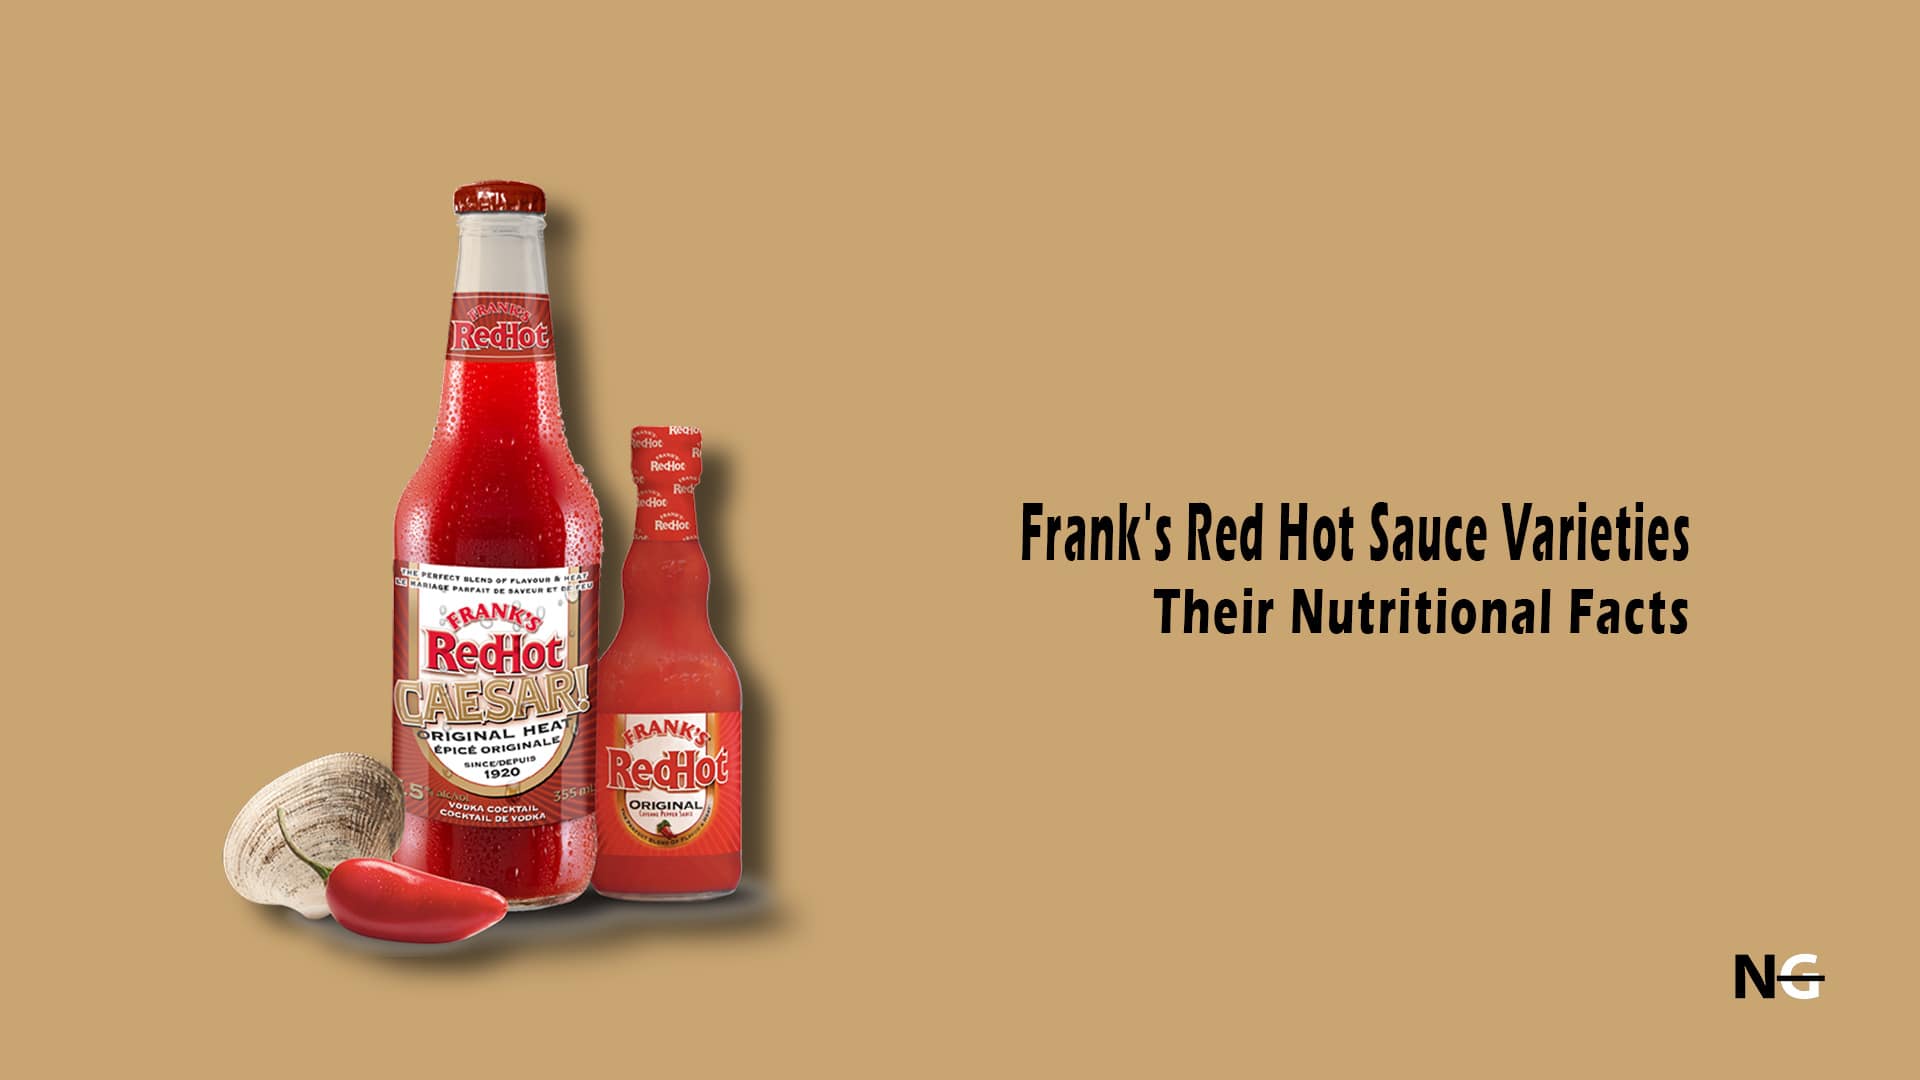 Frank's Red Hot Sauce Varieties And Their Nutritional Facts